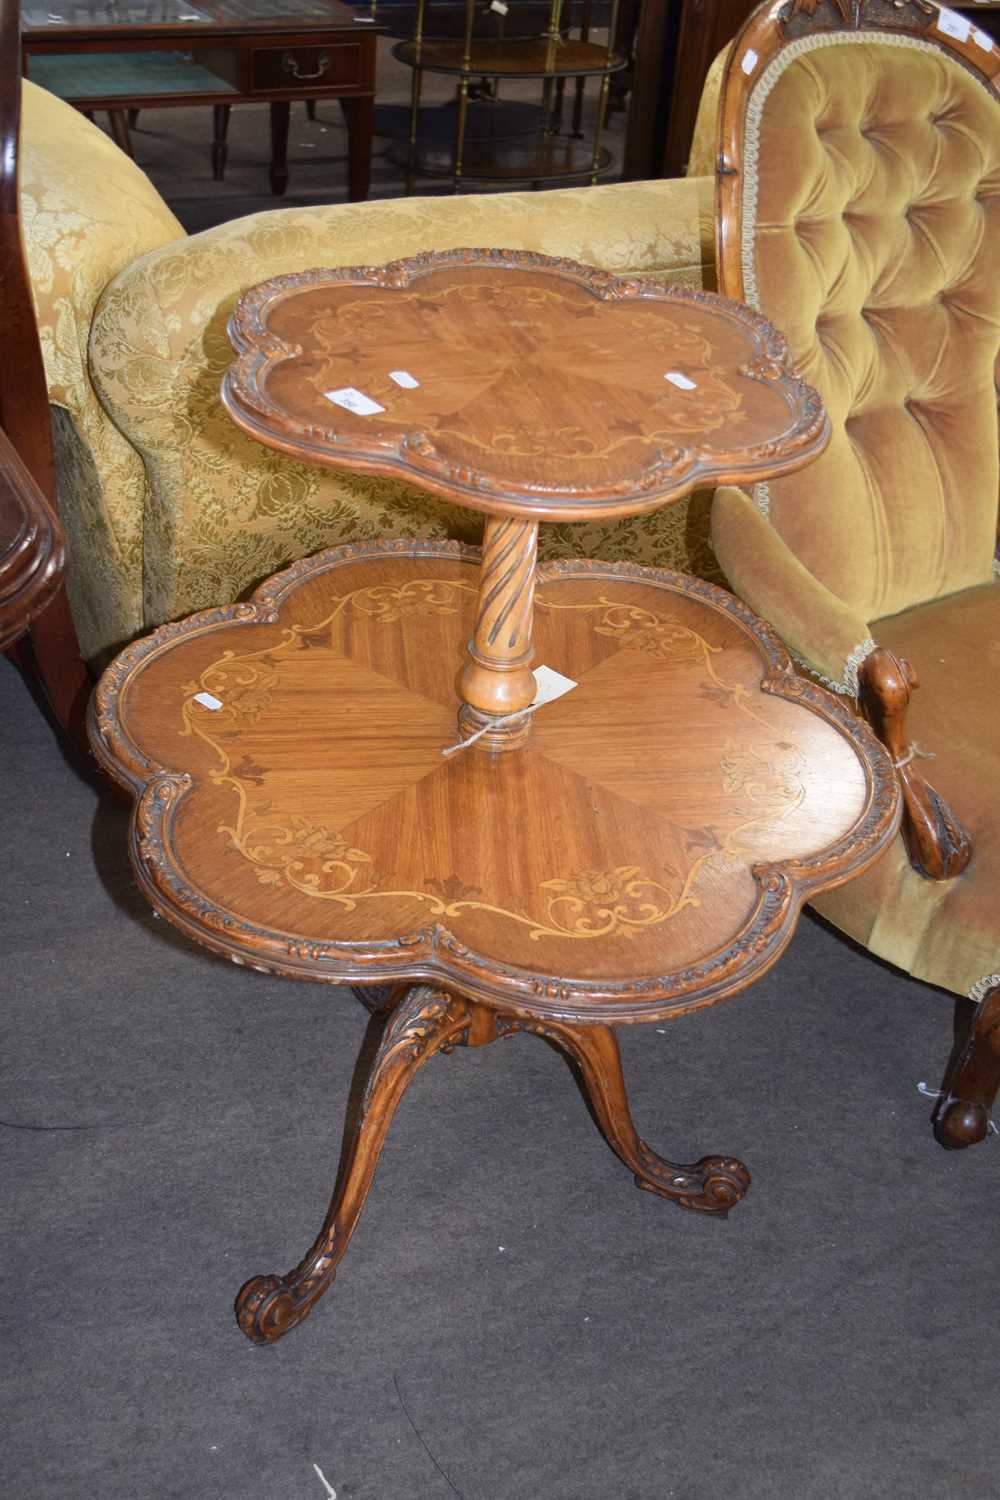 Victorian walnut and marquetry inlaid two-tier table or dumb waiter, raised on a tripod base, 83cm